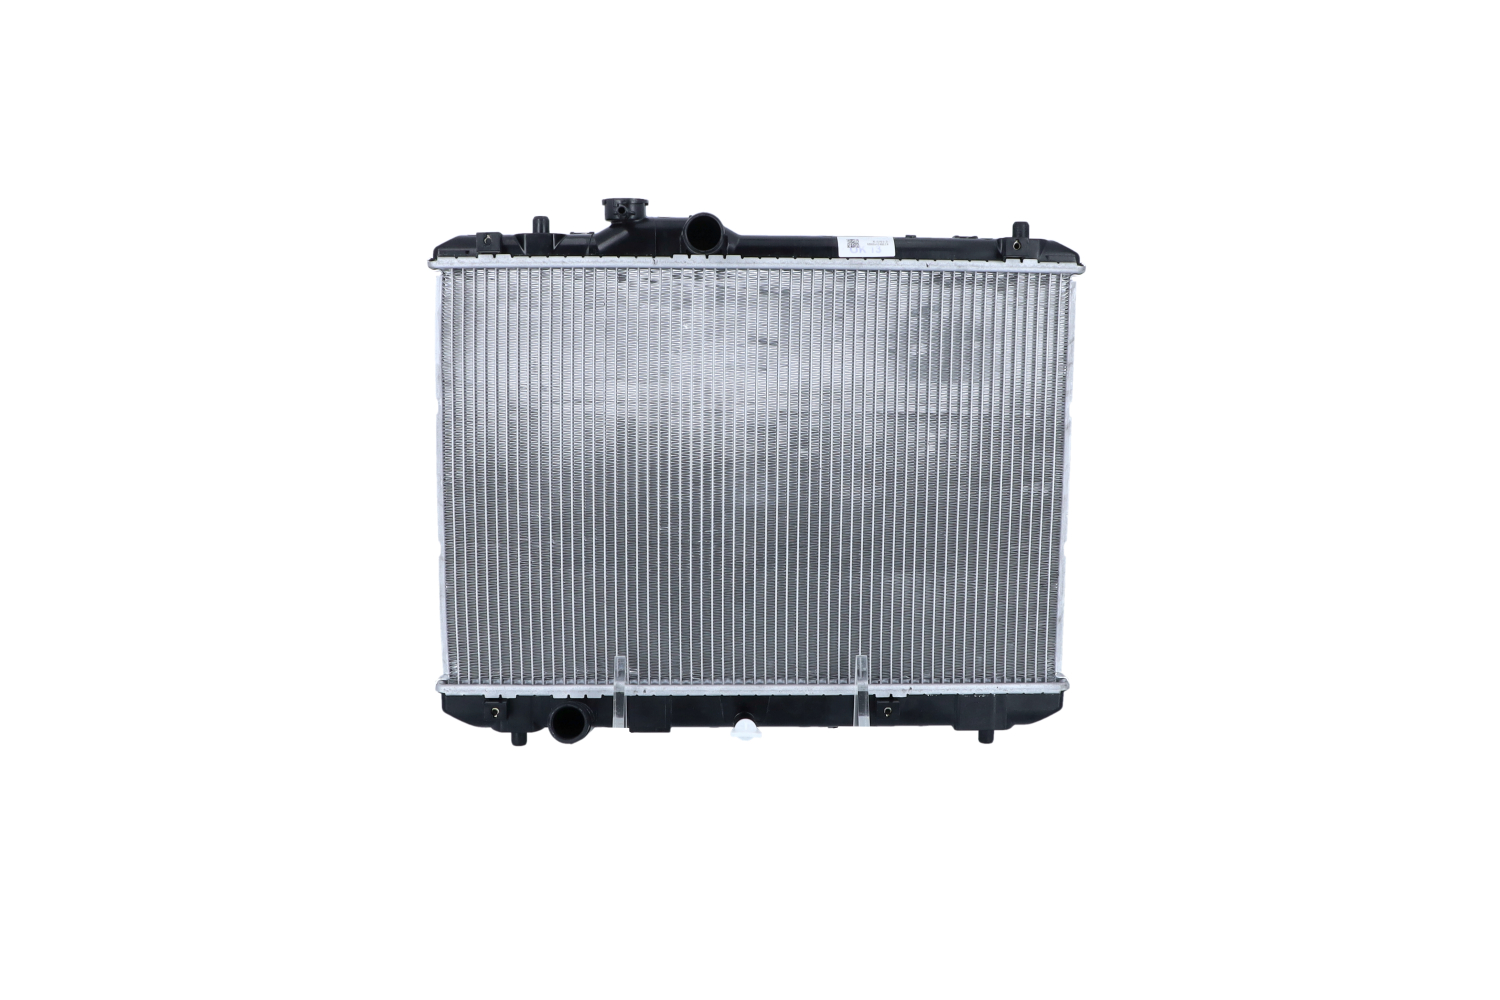 NRF 53582 Engine radiator Aluminium, 555 x 375 x 16 mm, with mounting parts, Brazed cooling fins